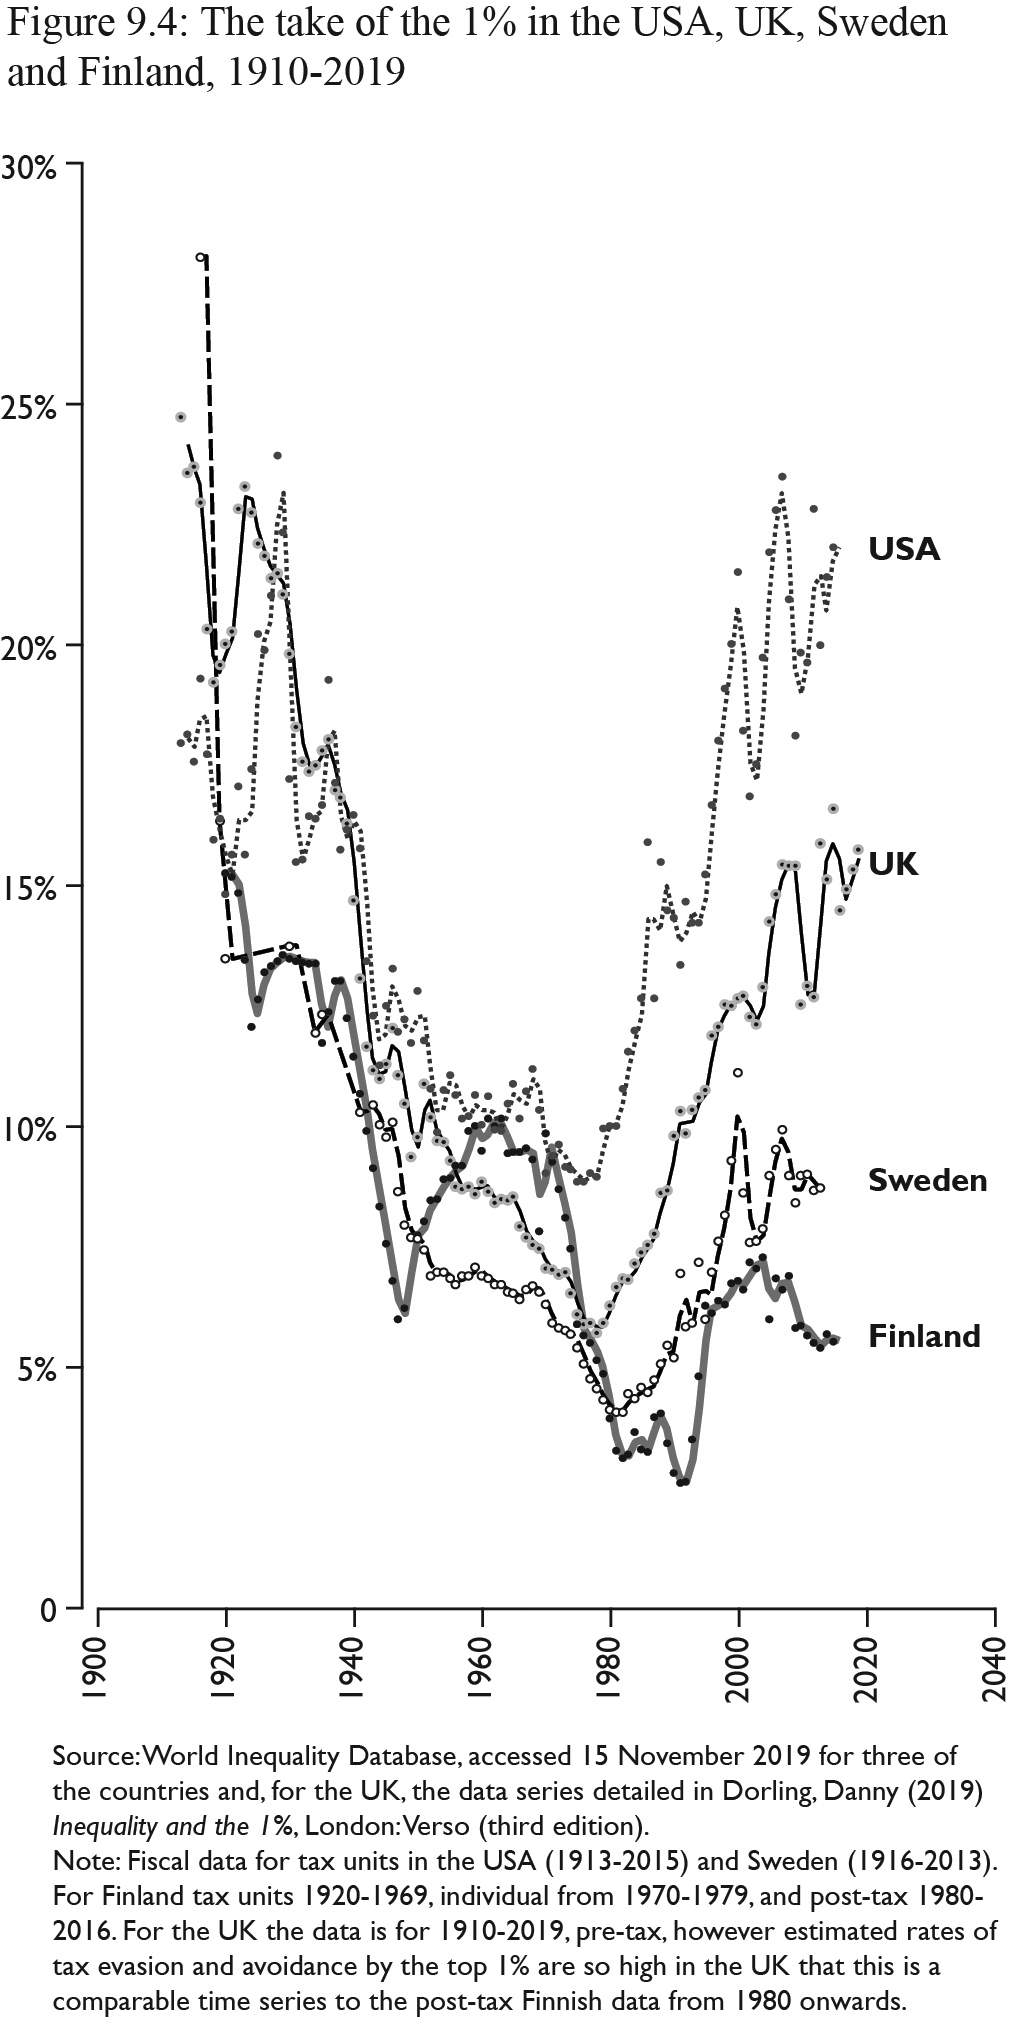 Figure 9.4: Source: Wold Inequality Database, accessed 15 November 2019 for three of the countries and, for the UK, the data series detailed in Dorling, Danny (2019) Inequality and the 1%, London: Verso (third edition).
Note: fiscal data for tax units in the USA (1913-2015) and Sweden (1916-2013). For Finland tax units 1920-1969, individual from 1970-1979, and post-tax 1980- 2016. For the UK the data is for 1910-2019, pre-tax, however estimated rates of tax evasion and avoidance by the top 1% are so high in the UK that this is a comparable time series to the post-tax Finish data from 1980 onwards